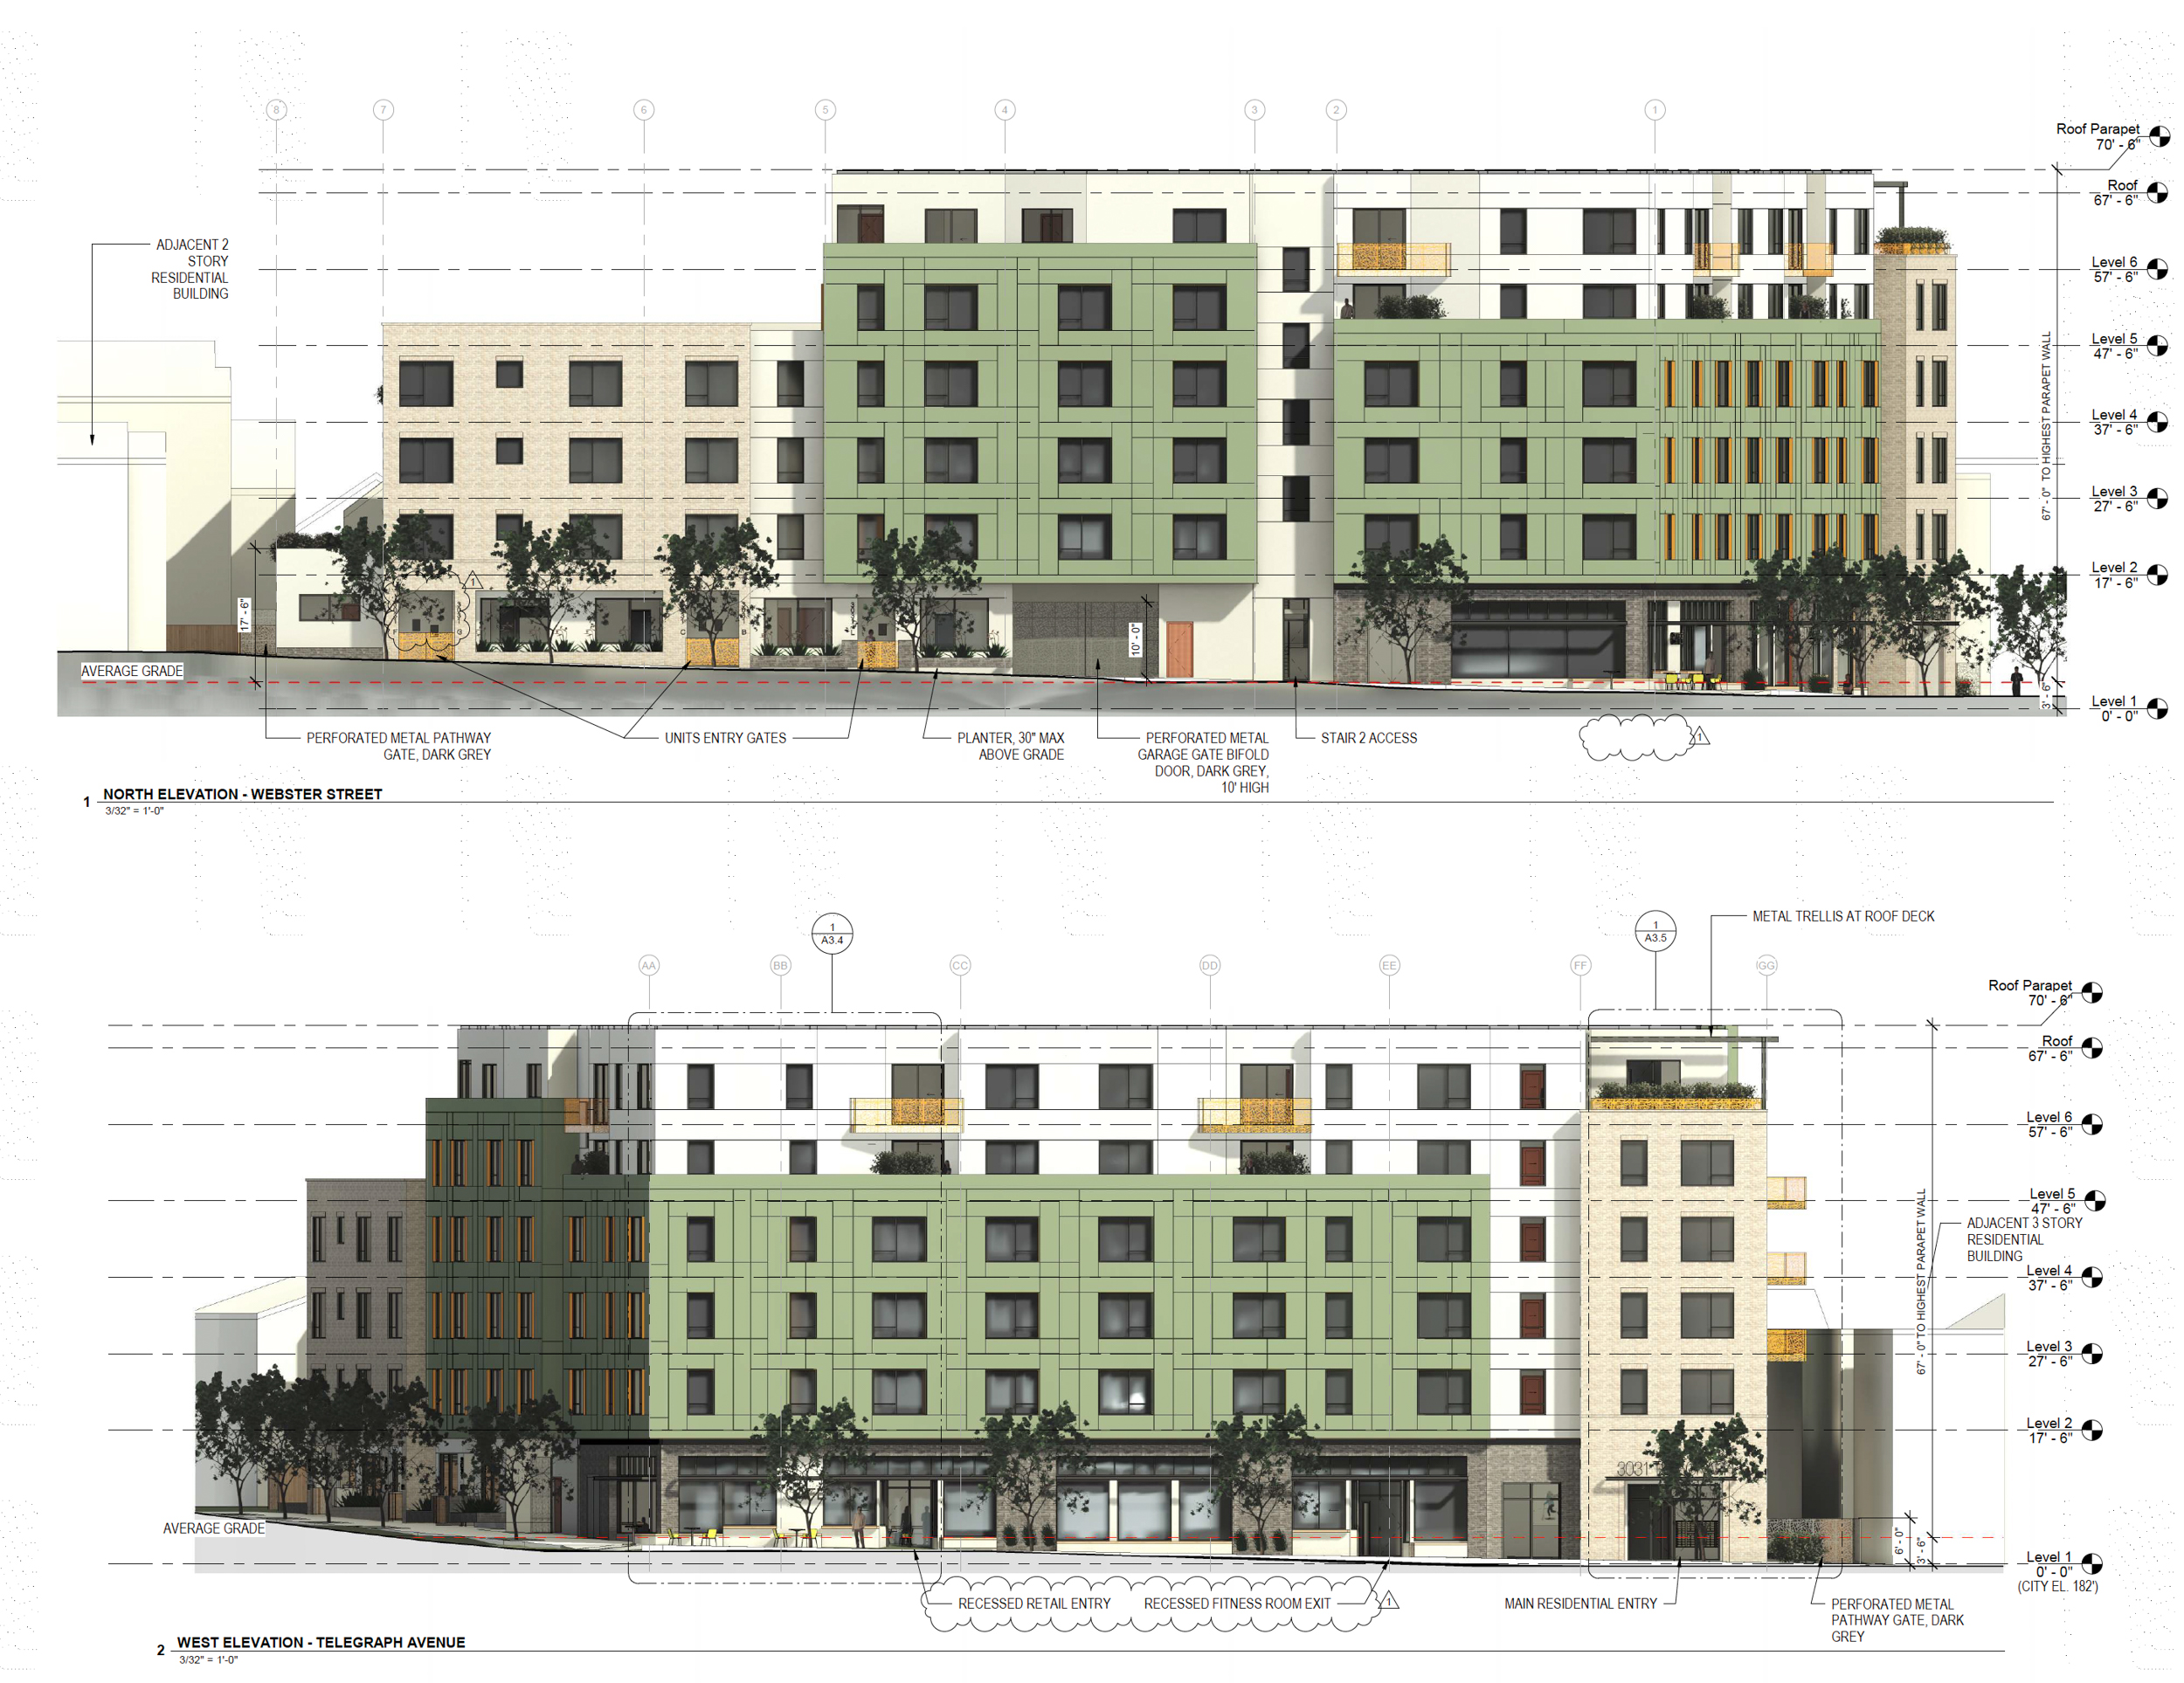 3031 Telegraph Avenue north and west facade elevations, illustration by Devi Dutta Architecture